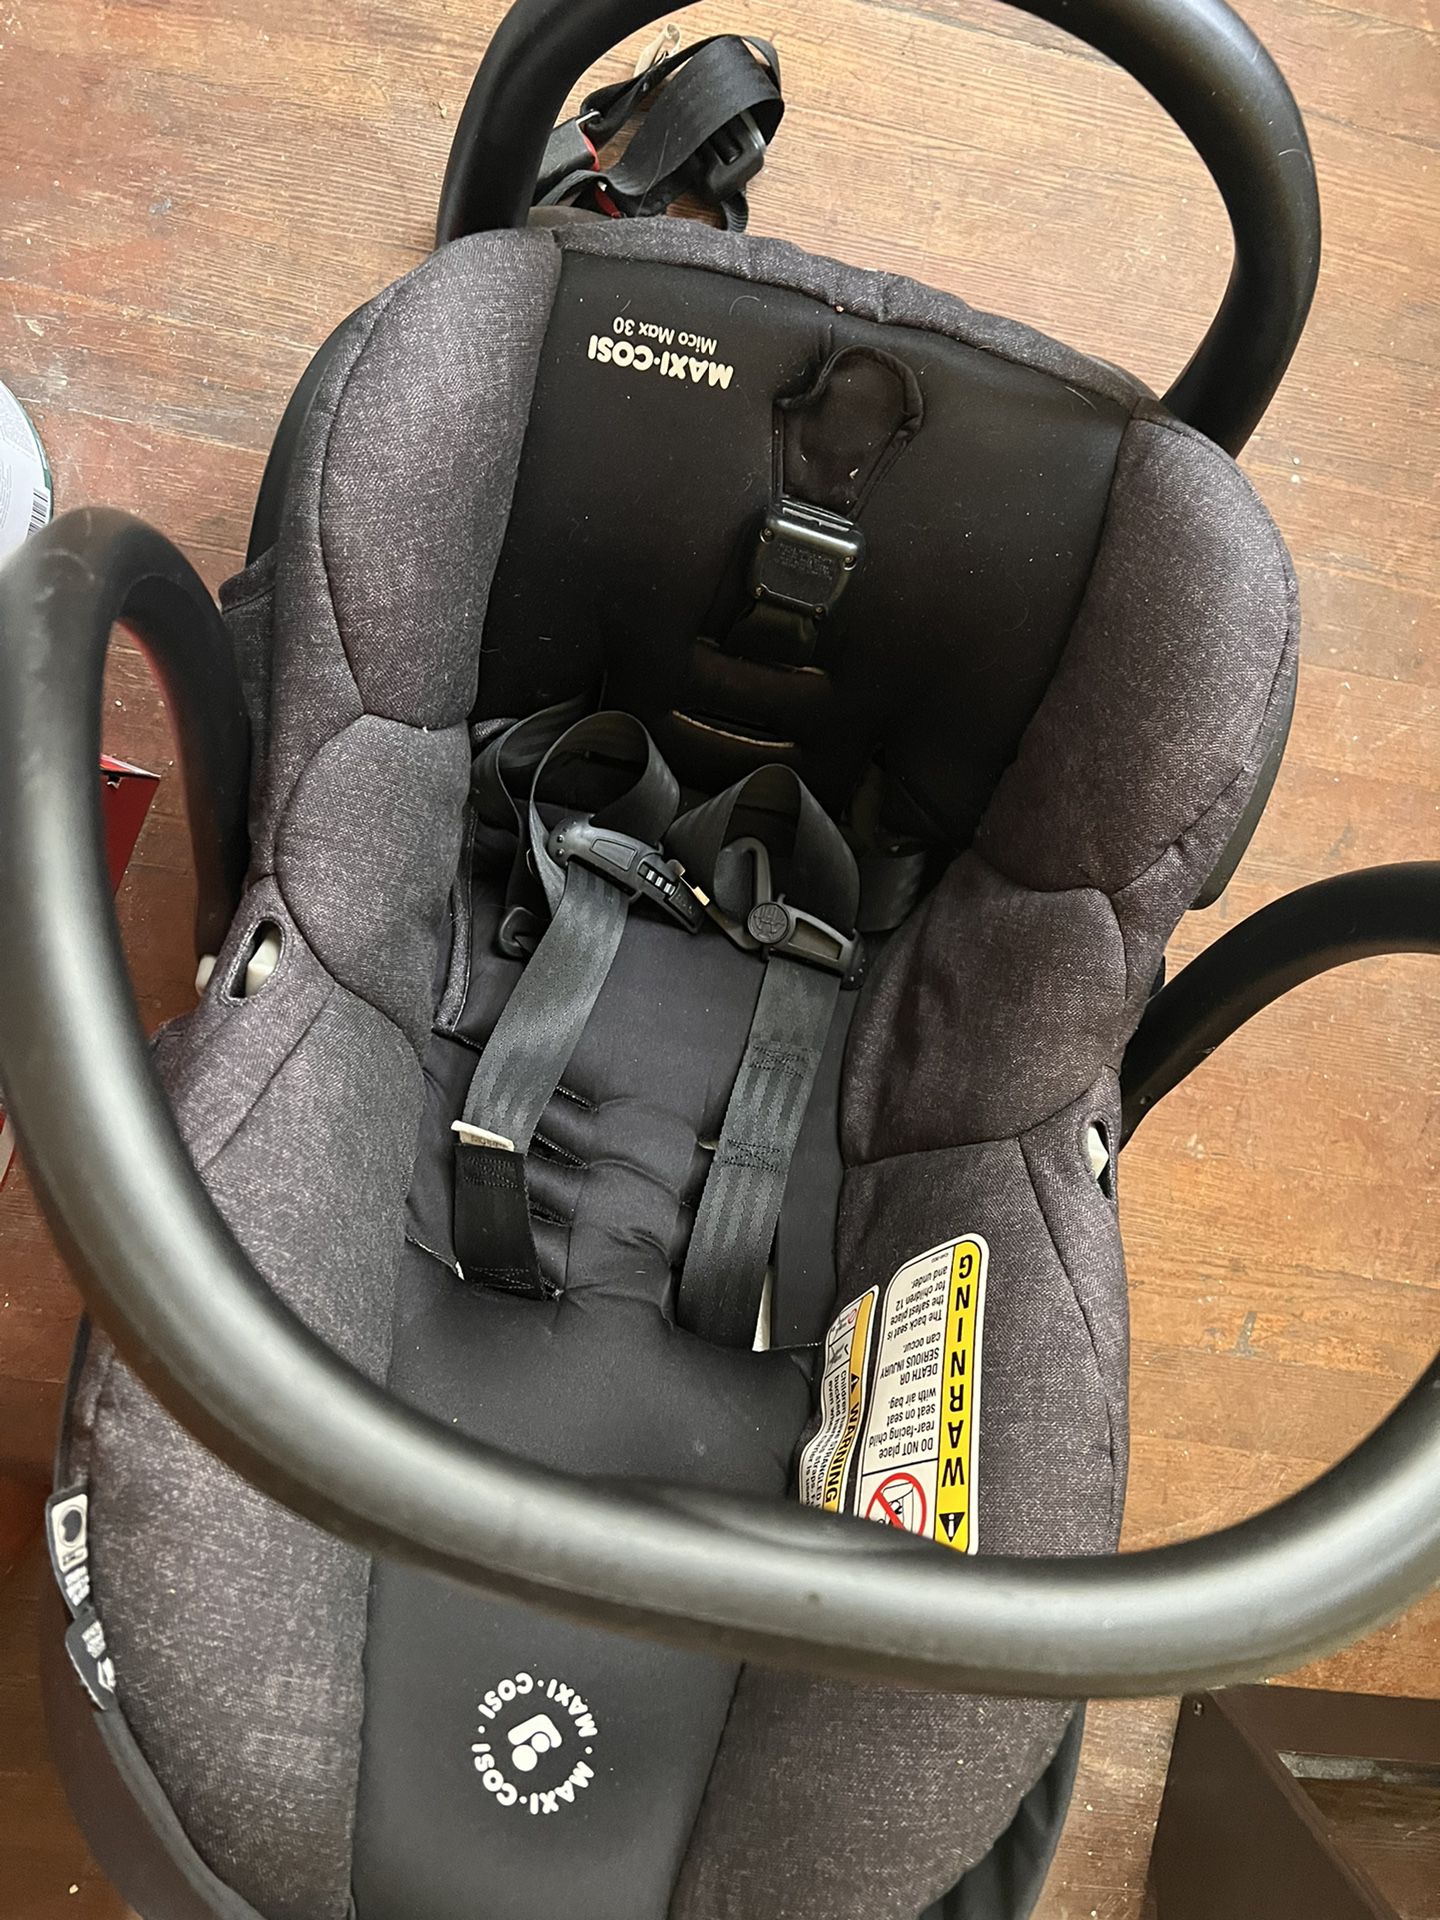 Maxi Cosi Car Seat, Base, And Travel Stroller